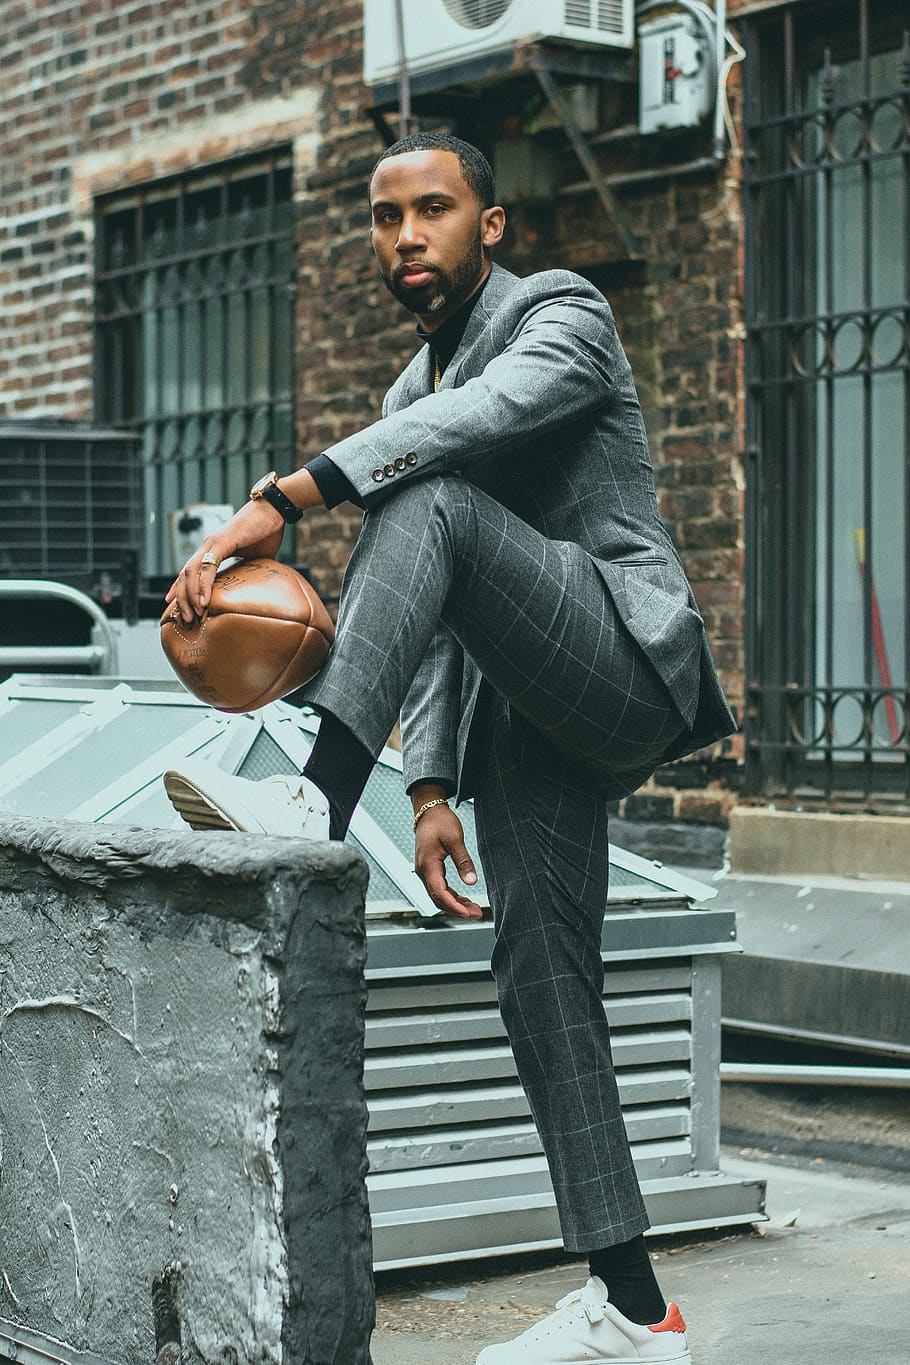 Stylish Ways to Wear a Suit with Sneakers - Suits Expert